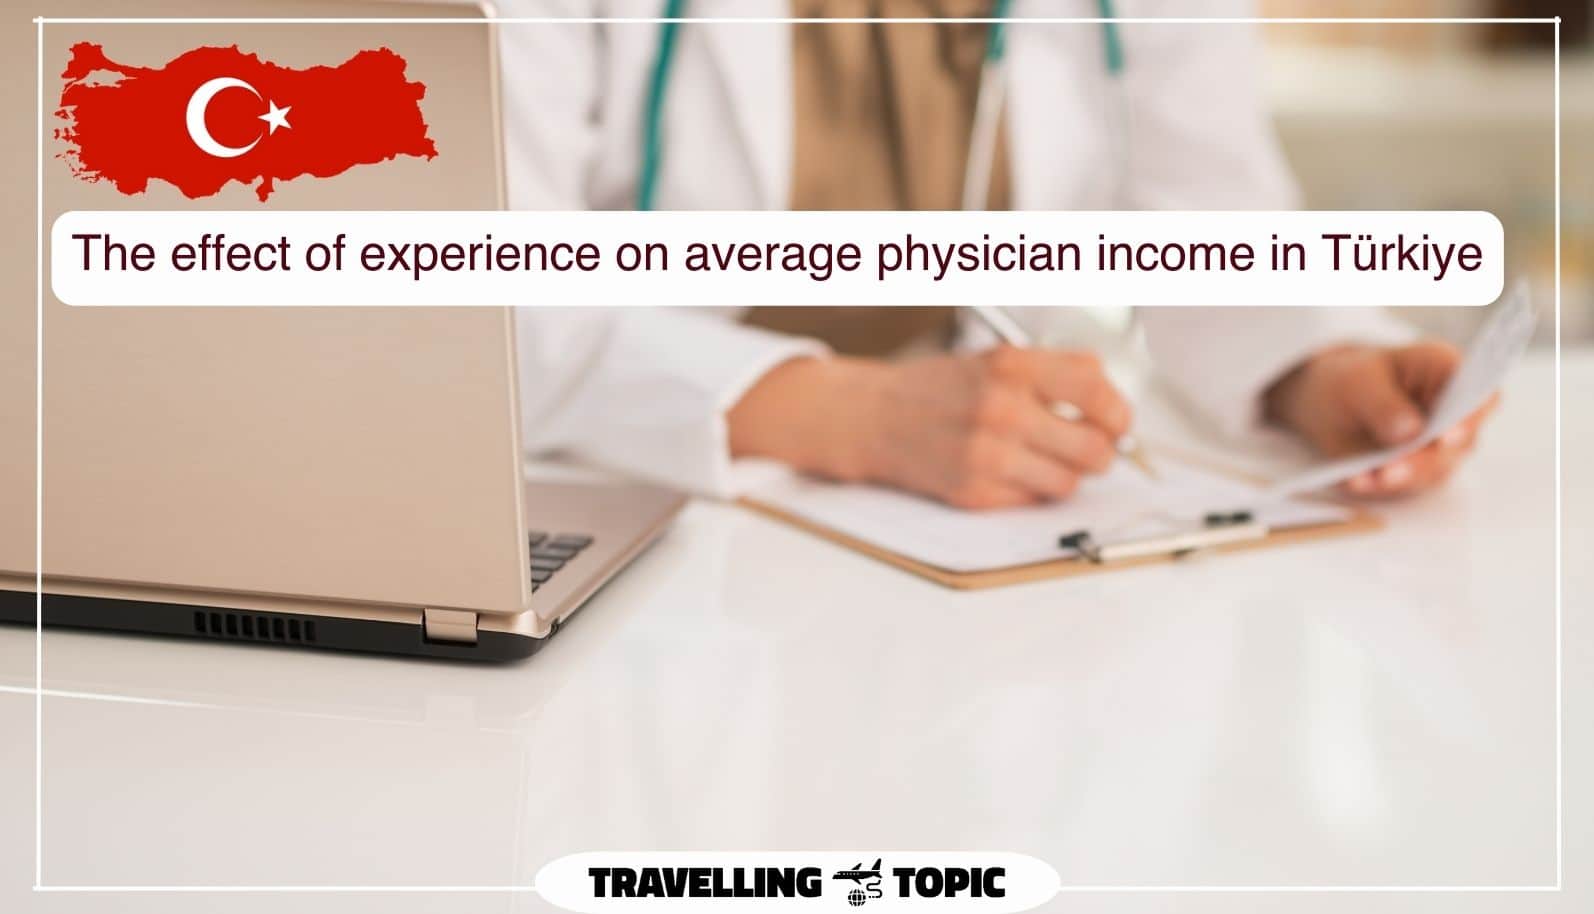 The effect of experience on average physician income in Türkiye